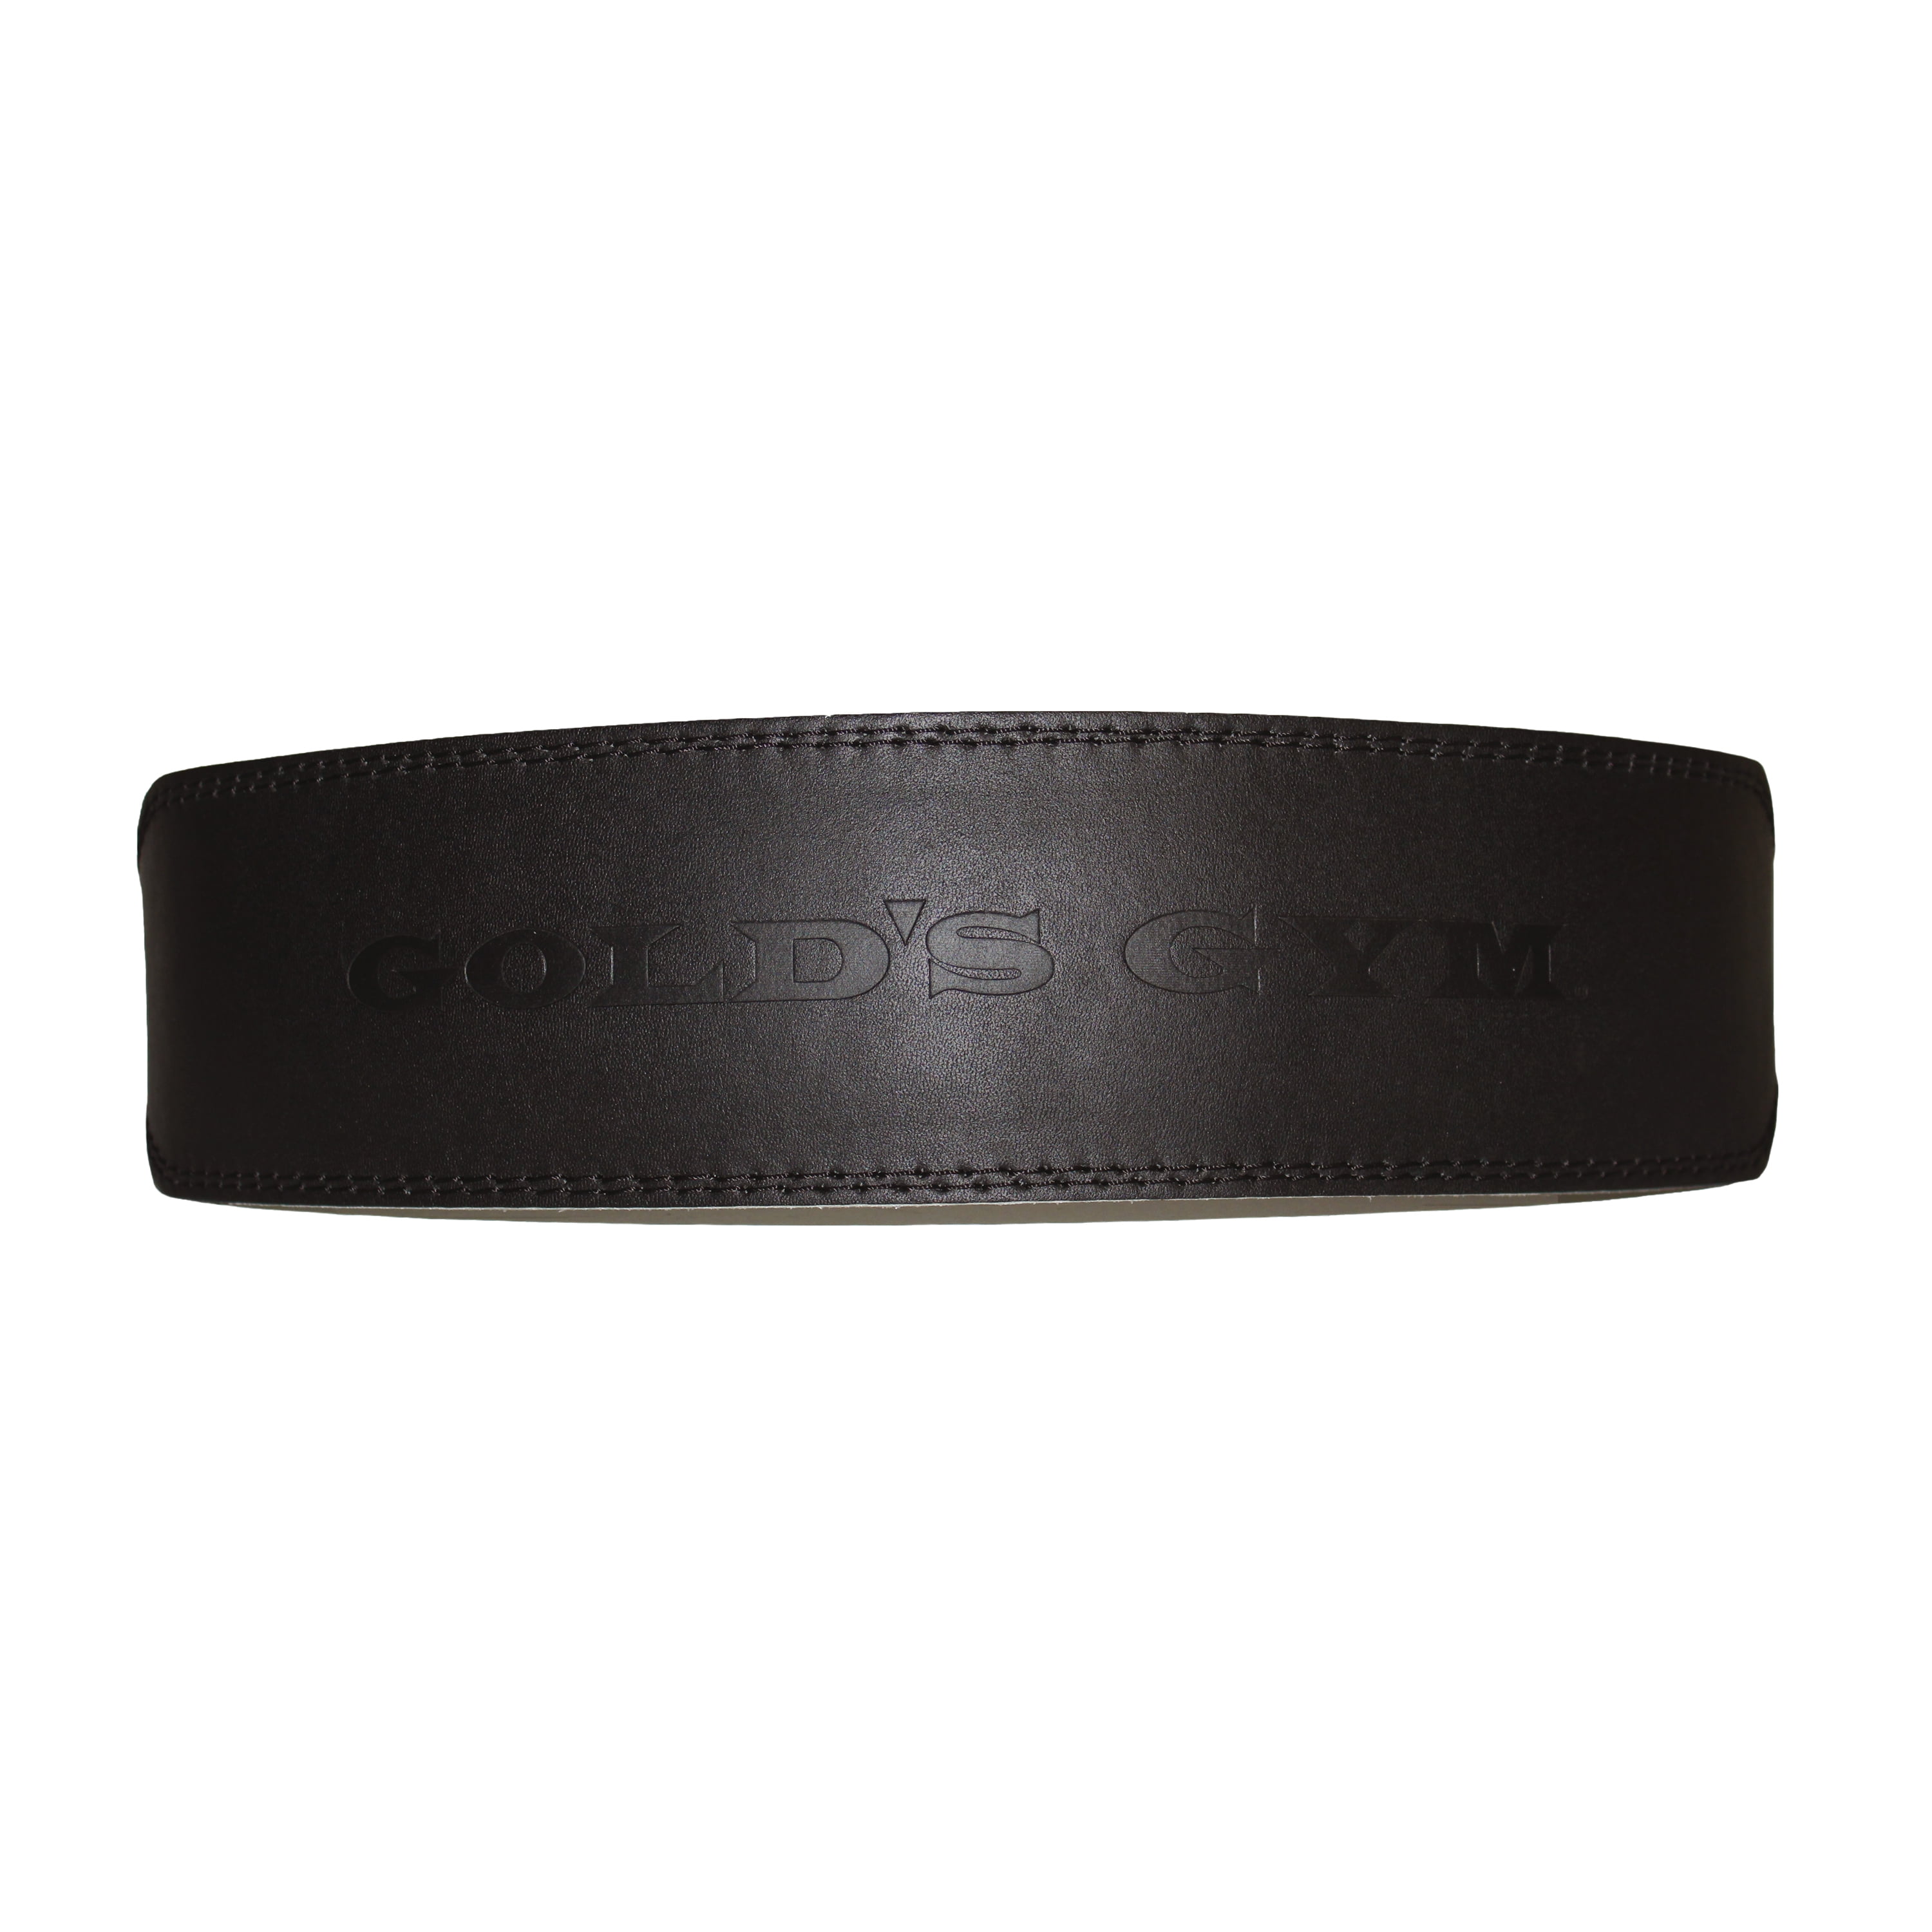 Gold's Gym Black Leather Weight Lifting Belt Size Xl/xxl for sale online 